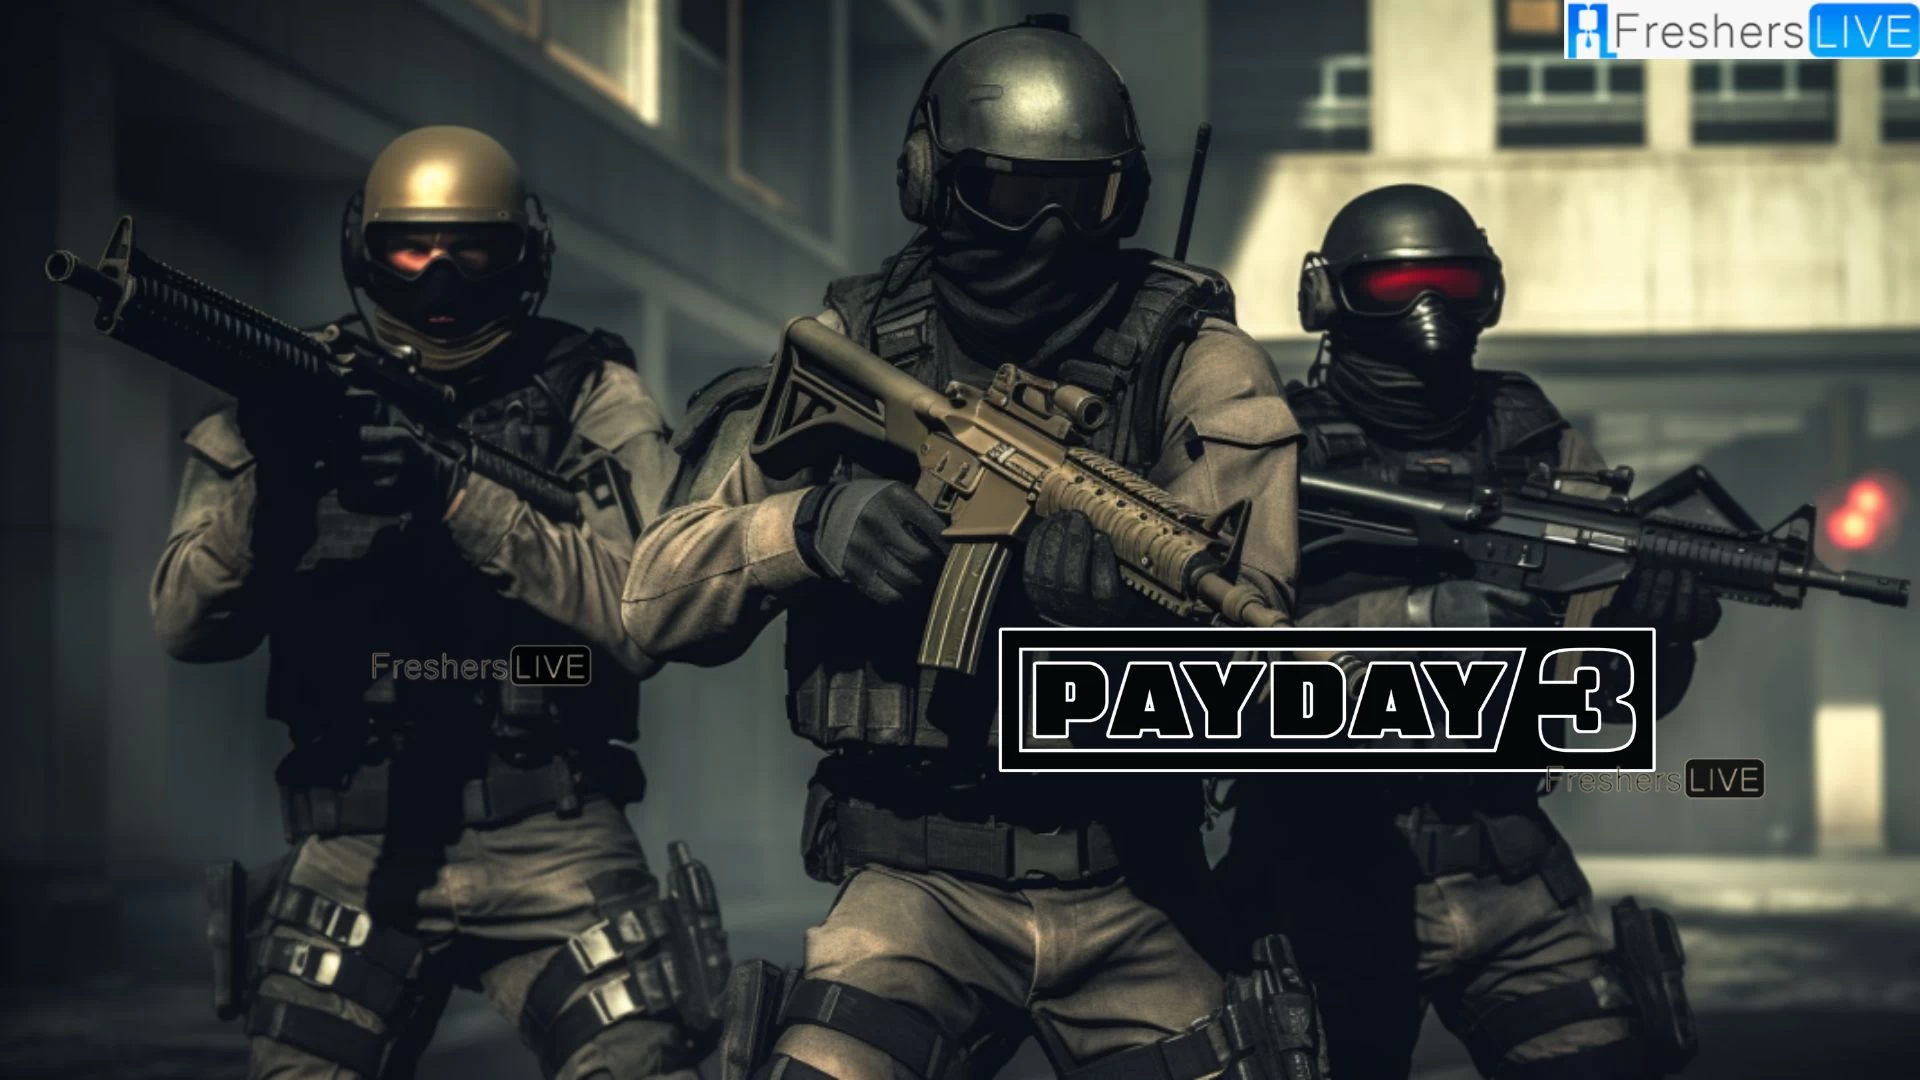 How to Defeat the Heavy Swat in Payday 3? Payday 3 Heavy Swat Fight Guide